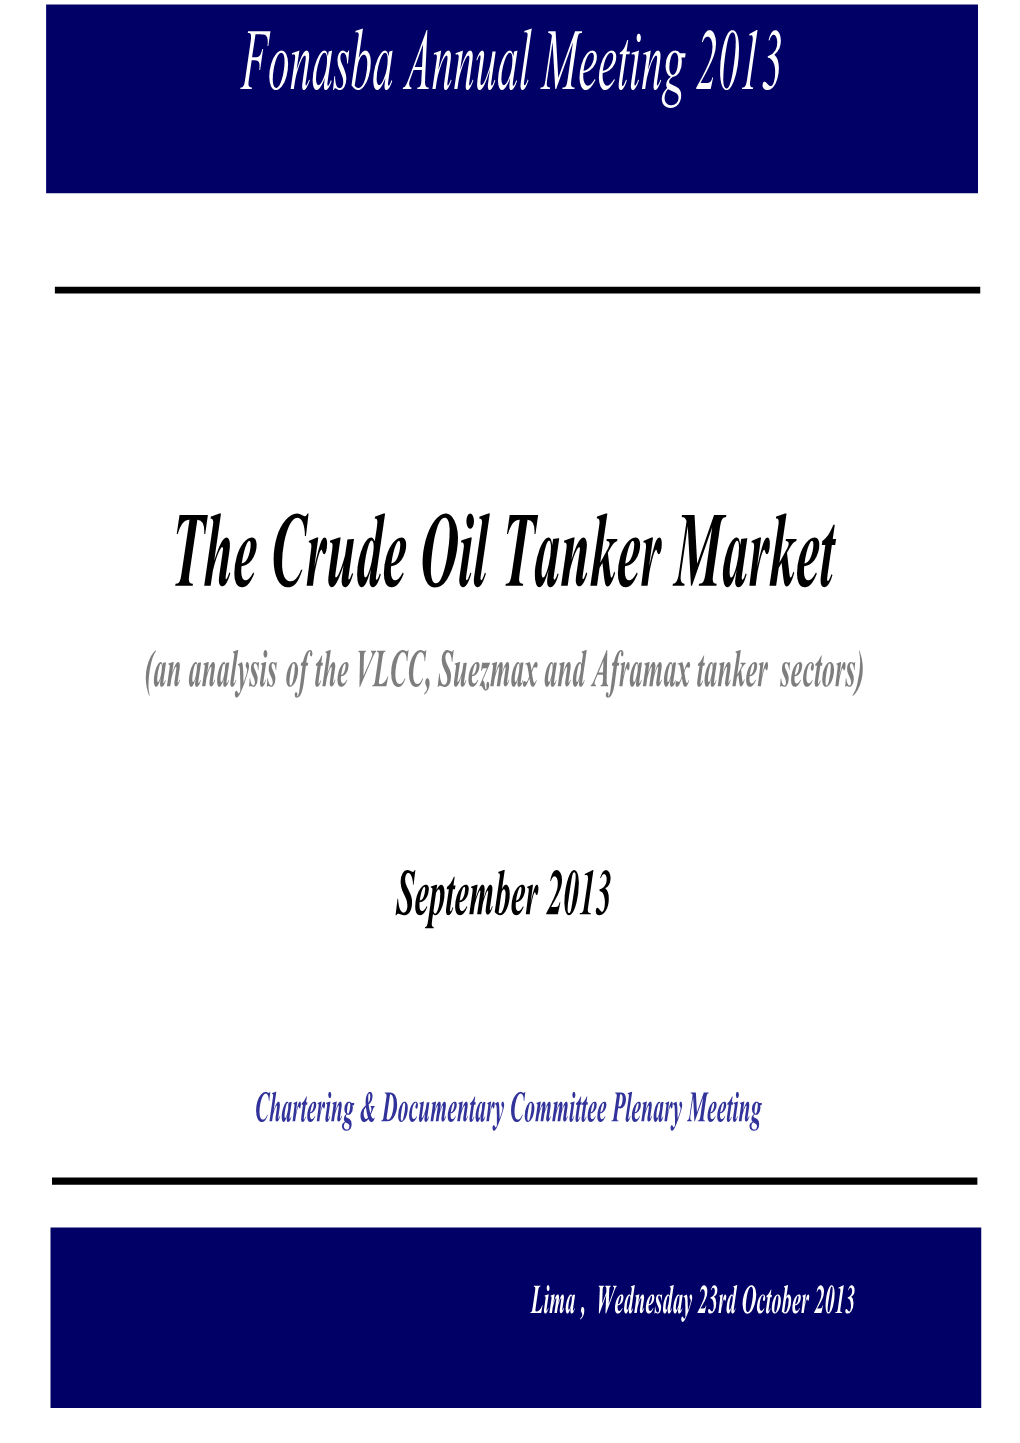 The Crude Oil Tanker Market (An Analysis of the VLCC, Suezmax and Aframax Tanker Sectors)